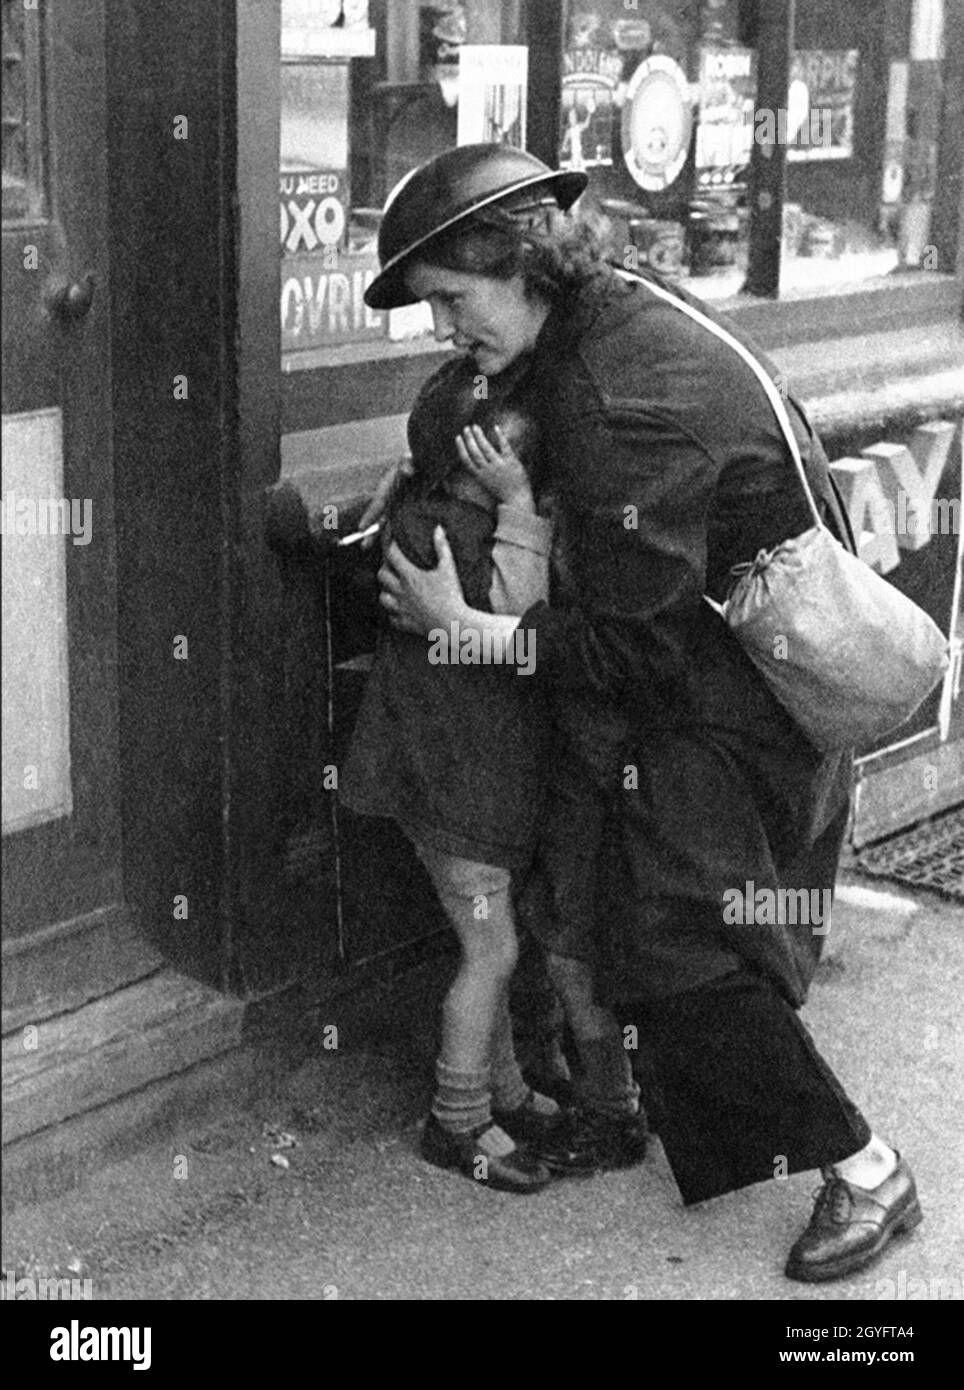 A young woman (Mary Couchman), working as an Air Raid Warden shielding young children as bombs fall during the Blitz, London 1940. Stock Photo